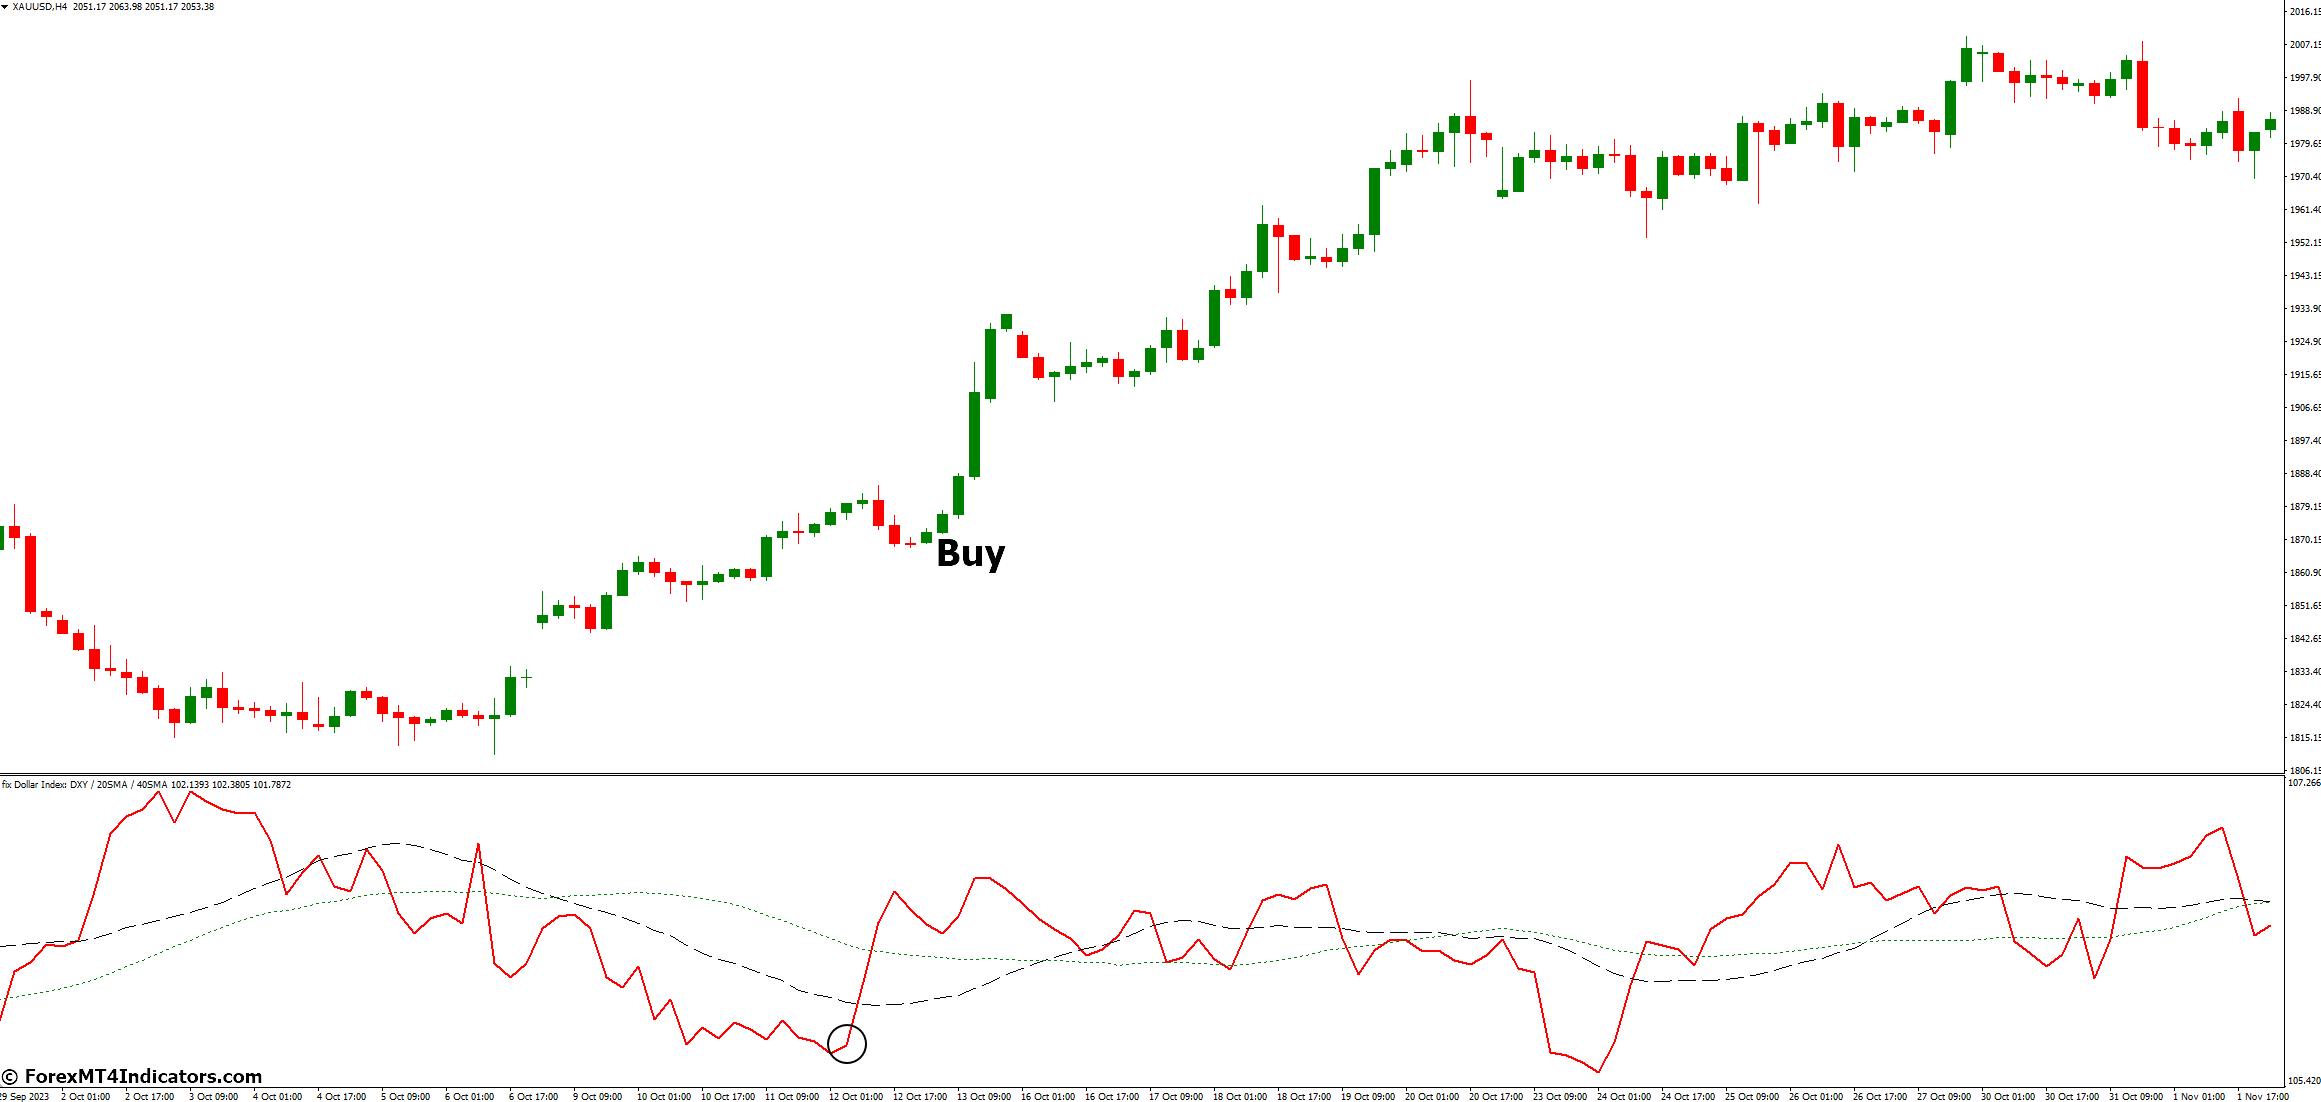 How to Trade with DXY Dollar Index Indicator - Buy Entry